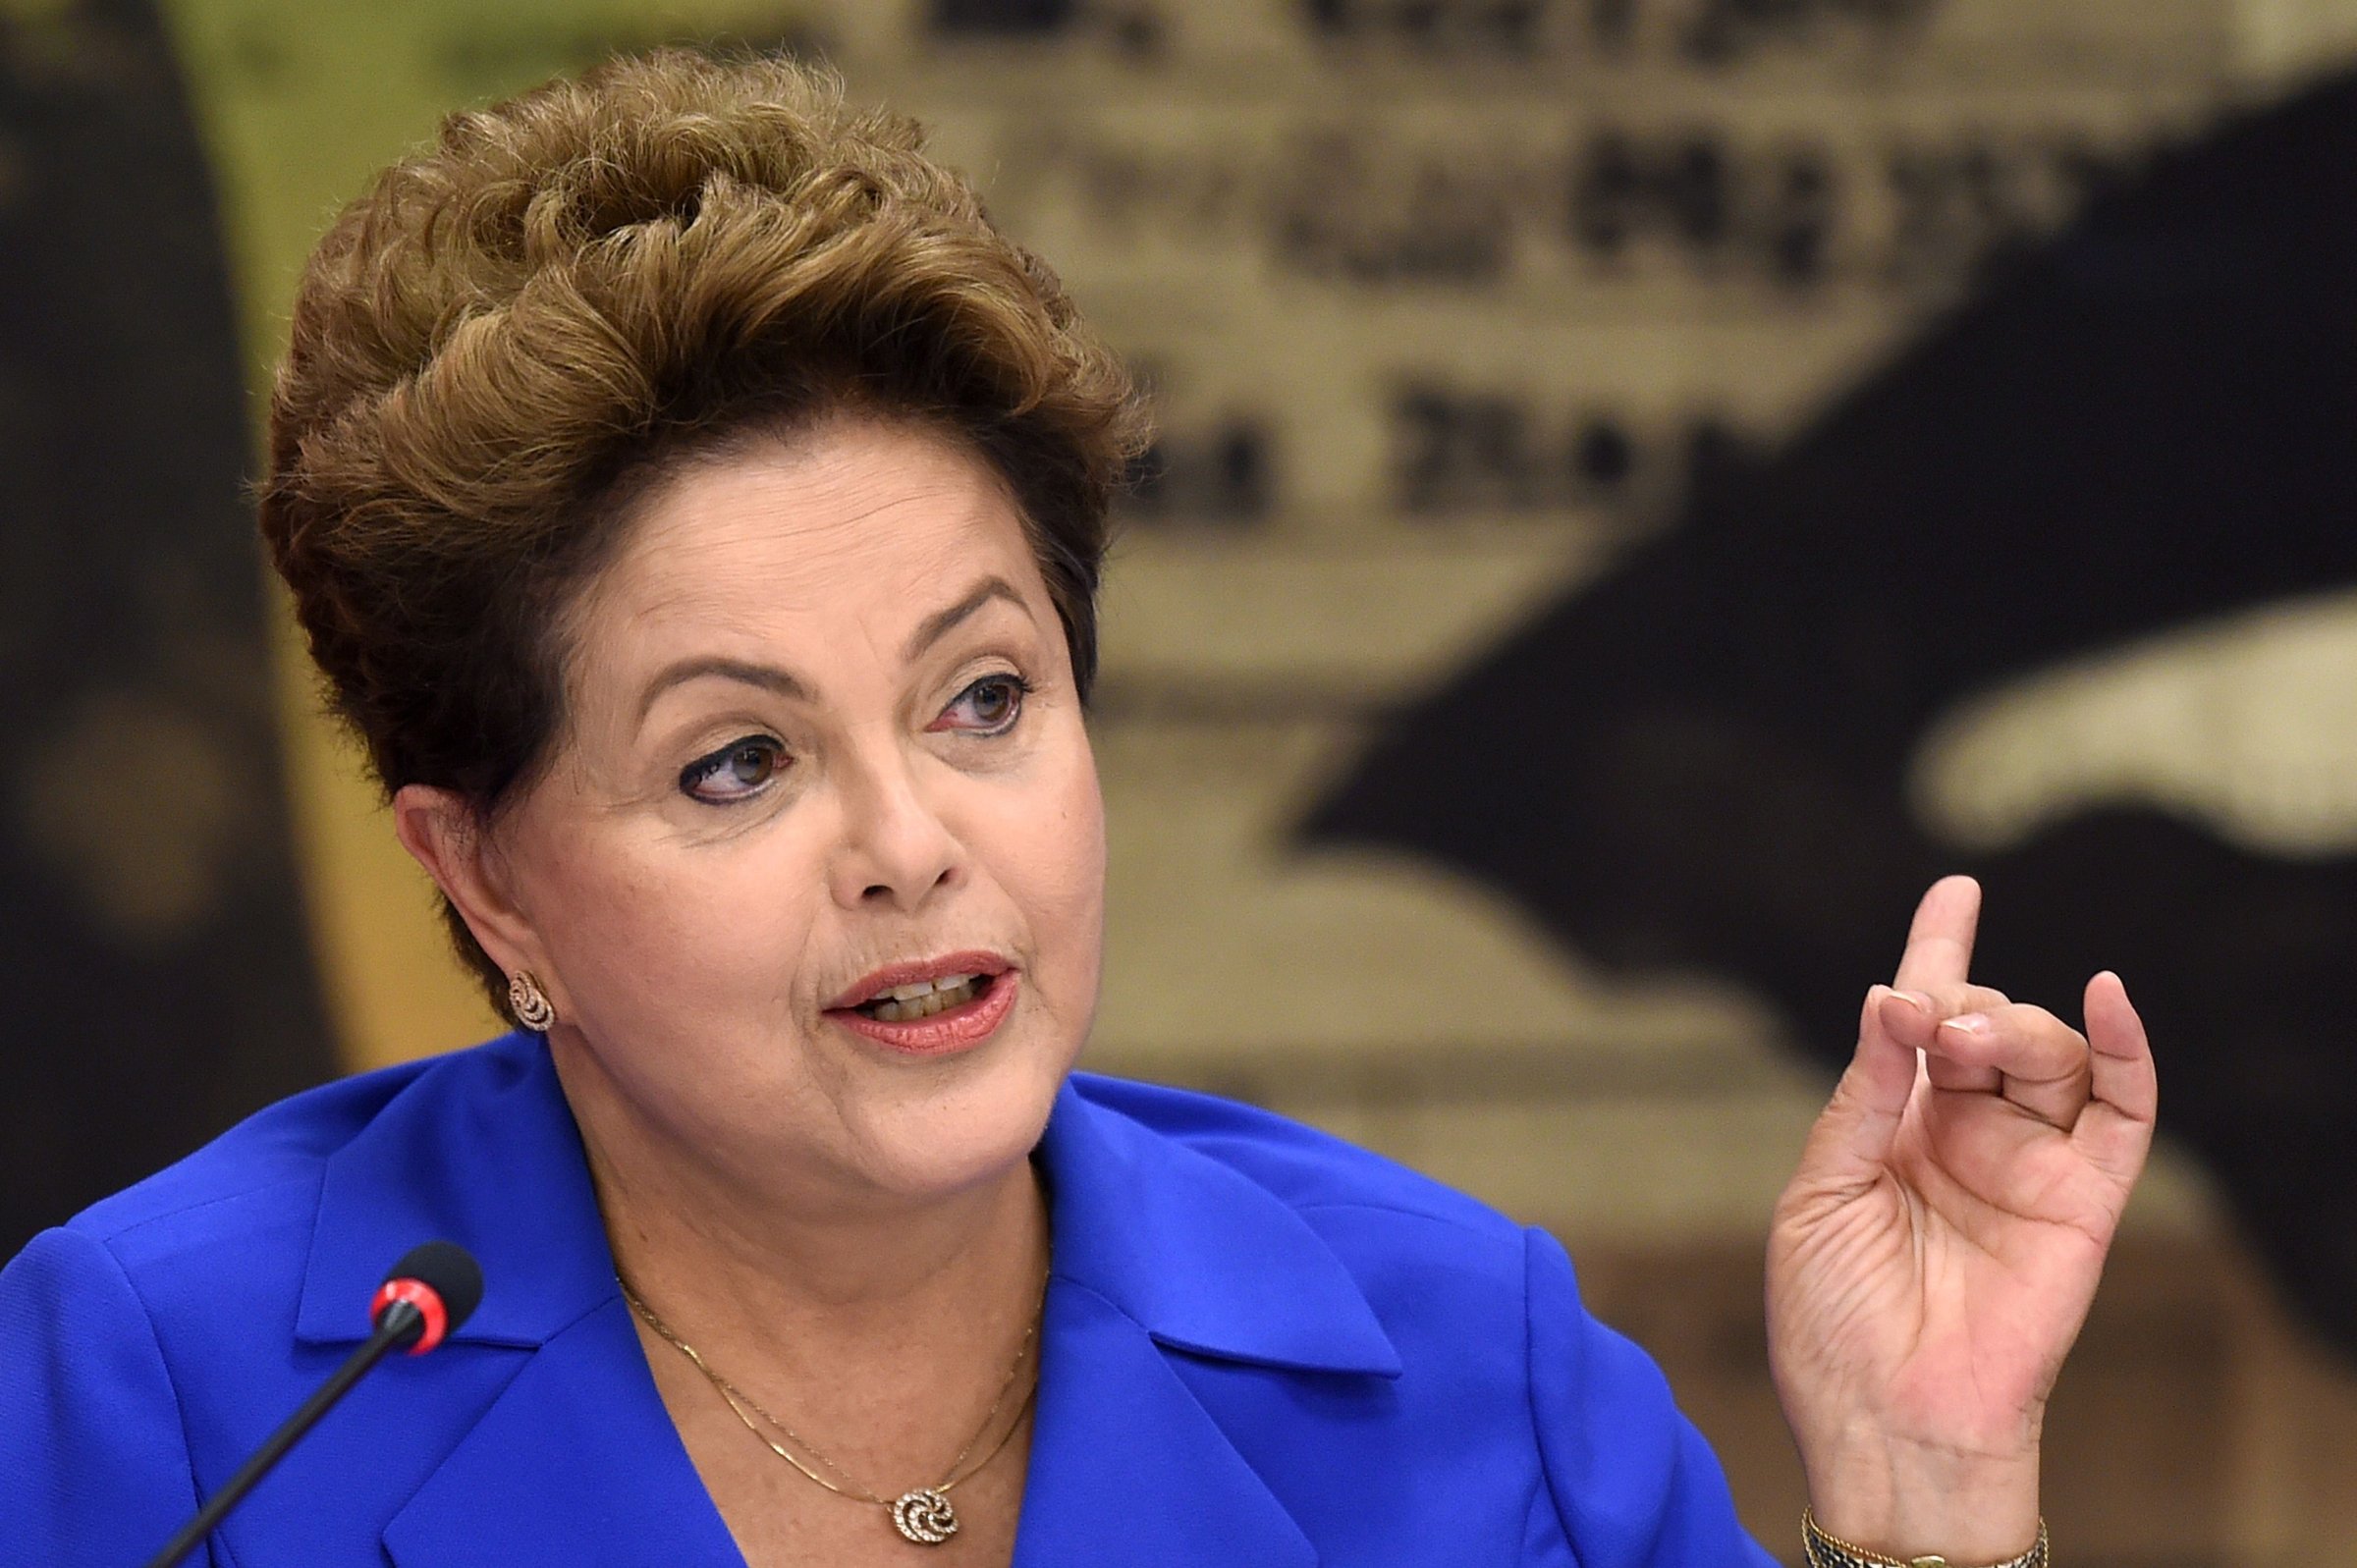 Brazil's President and presidential candidate for the Workers' Party Dilma Rousseff, speaks during a meeting with Governors and Senators elected in the first round of general elections, in Brasilia, Brazil on Oct. 7, 2014.